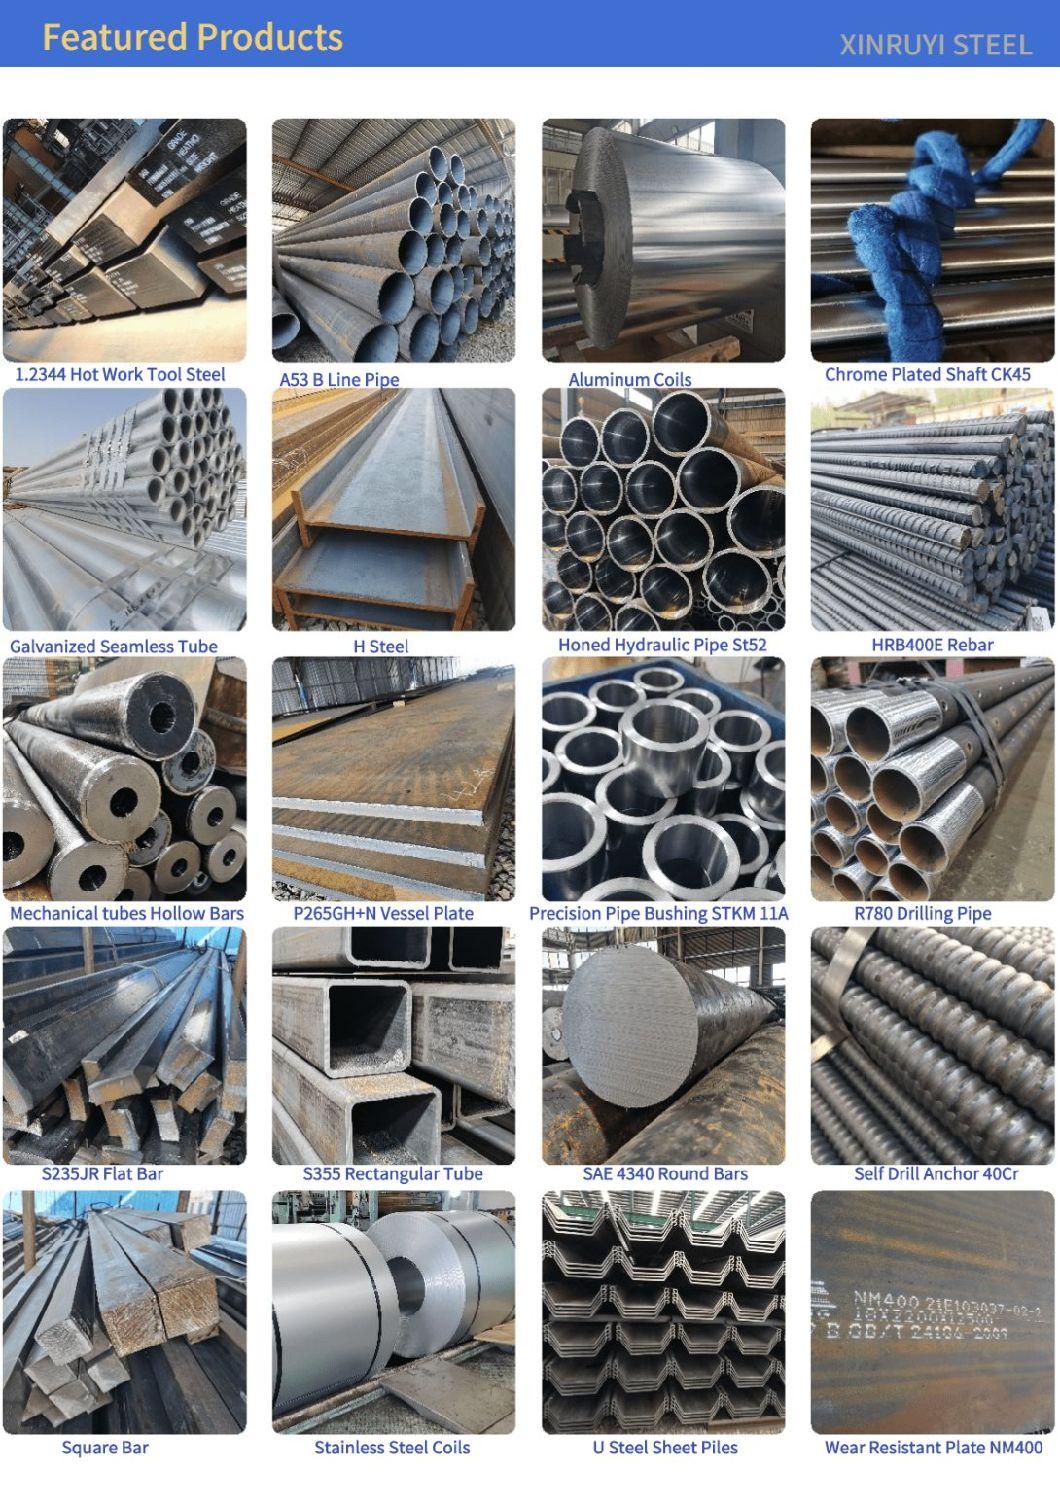 AISI SAE 4130 4140 4145 4145h 4340 42CrMo Forged Machined Turned Alloy API 7 Steel Drill Pipe Stem Rod Hollow Solid Bar Q+T Quenched Normalized and Tempered